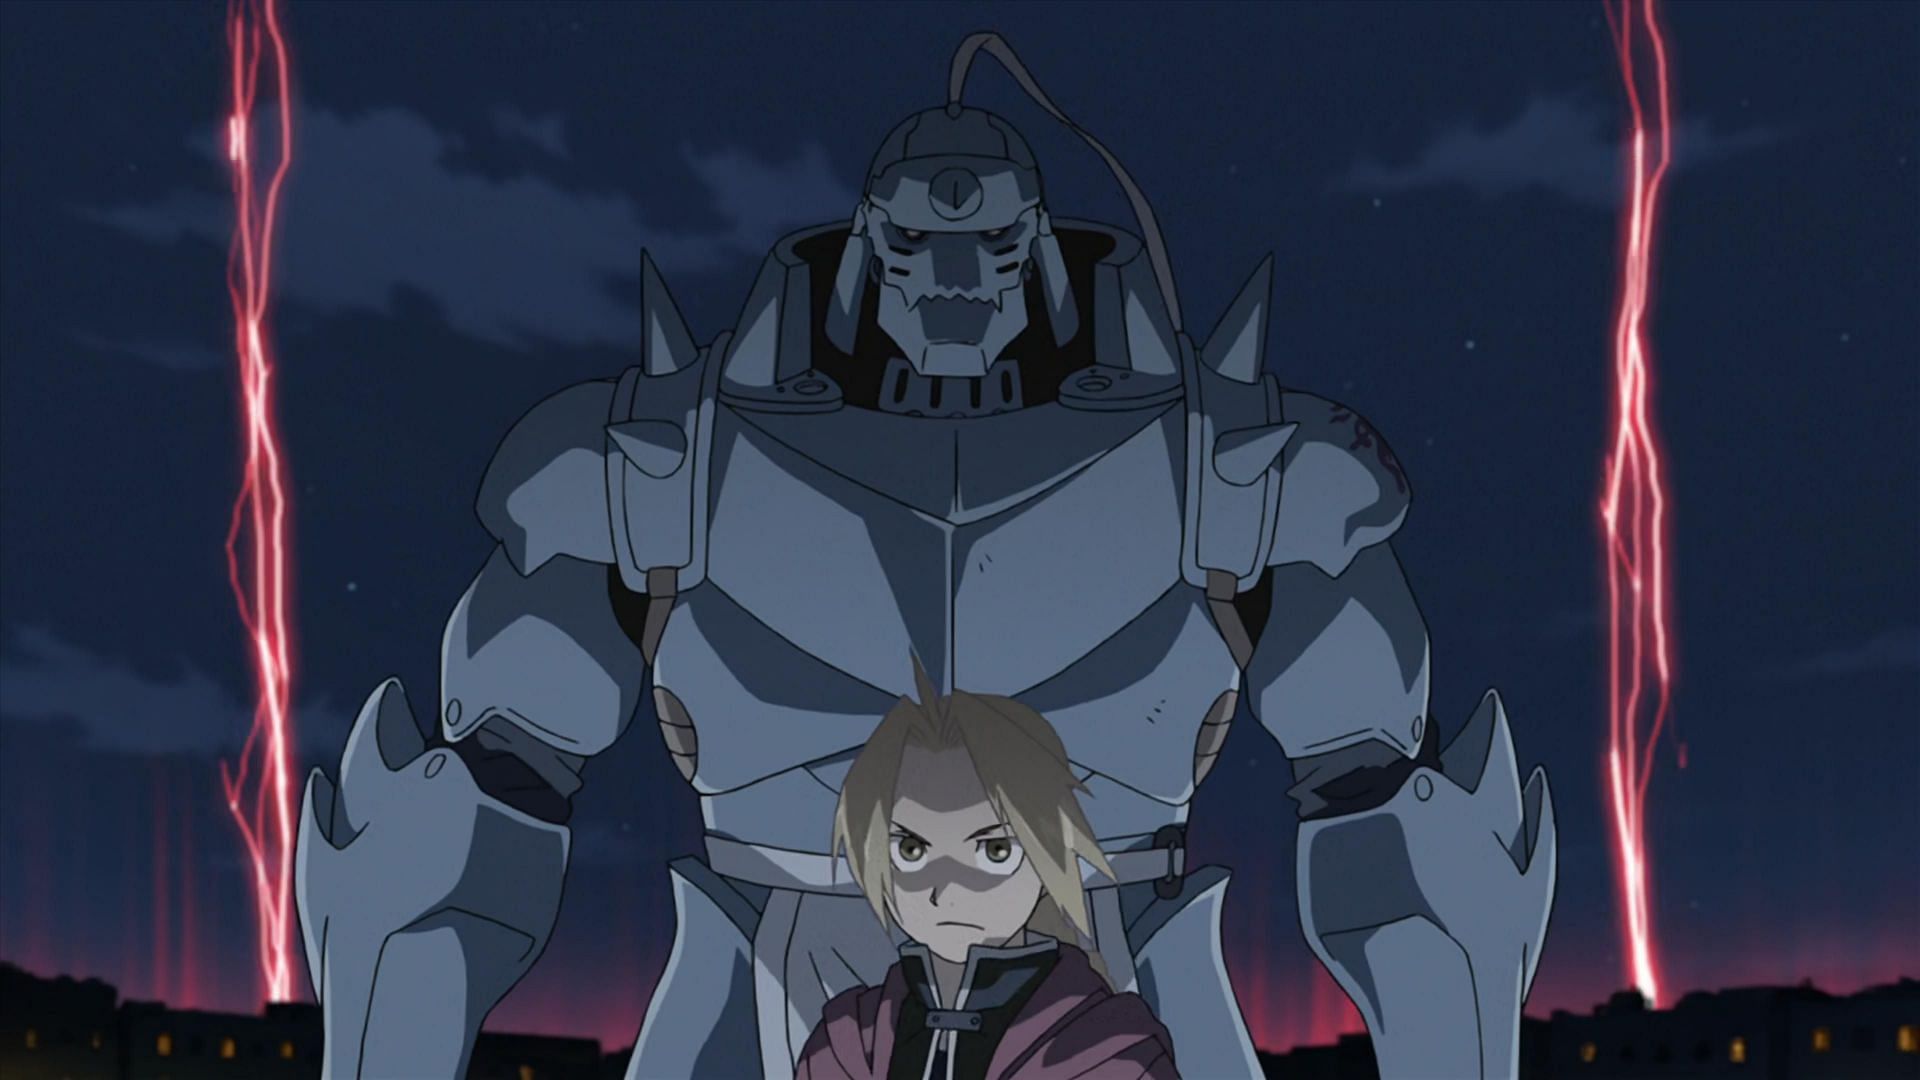 Alphonse and Edward Elric as seen in the anime series (Image via Studio Bones)